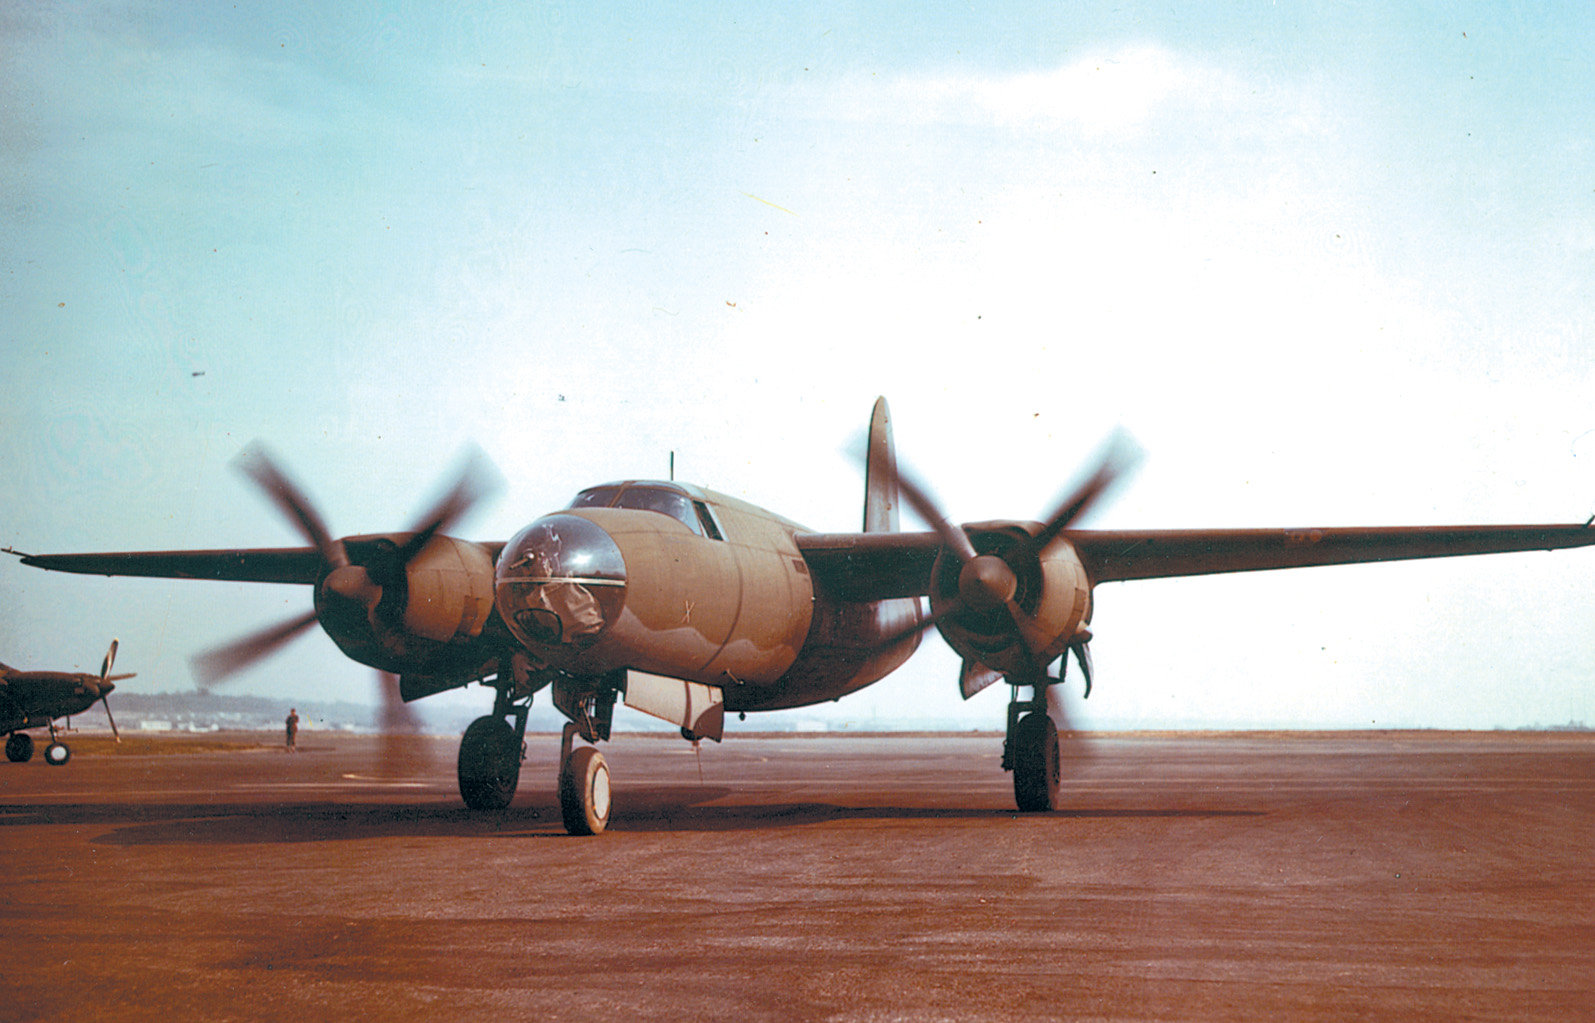 The tricycle landing gear of the B-26 Marauder is clearly visible as this plane taxis along a dirt airstrip. Although it was a challenge to fly, the B-26 proved itself a capable tactical bomber.